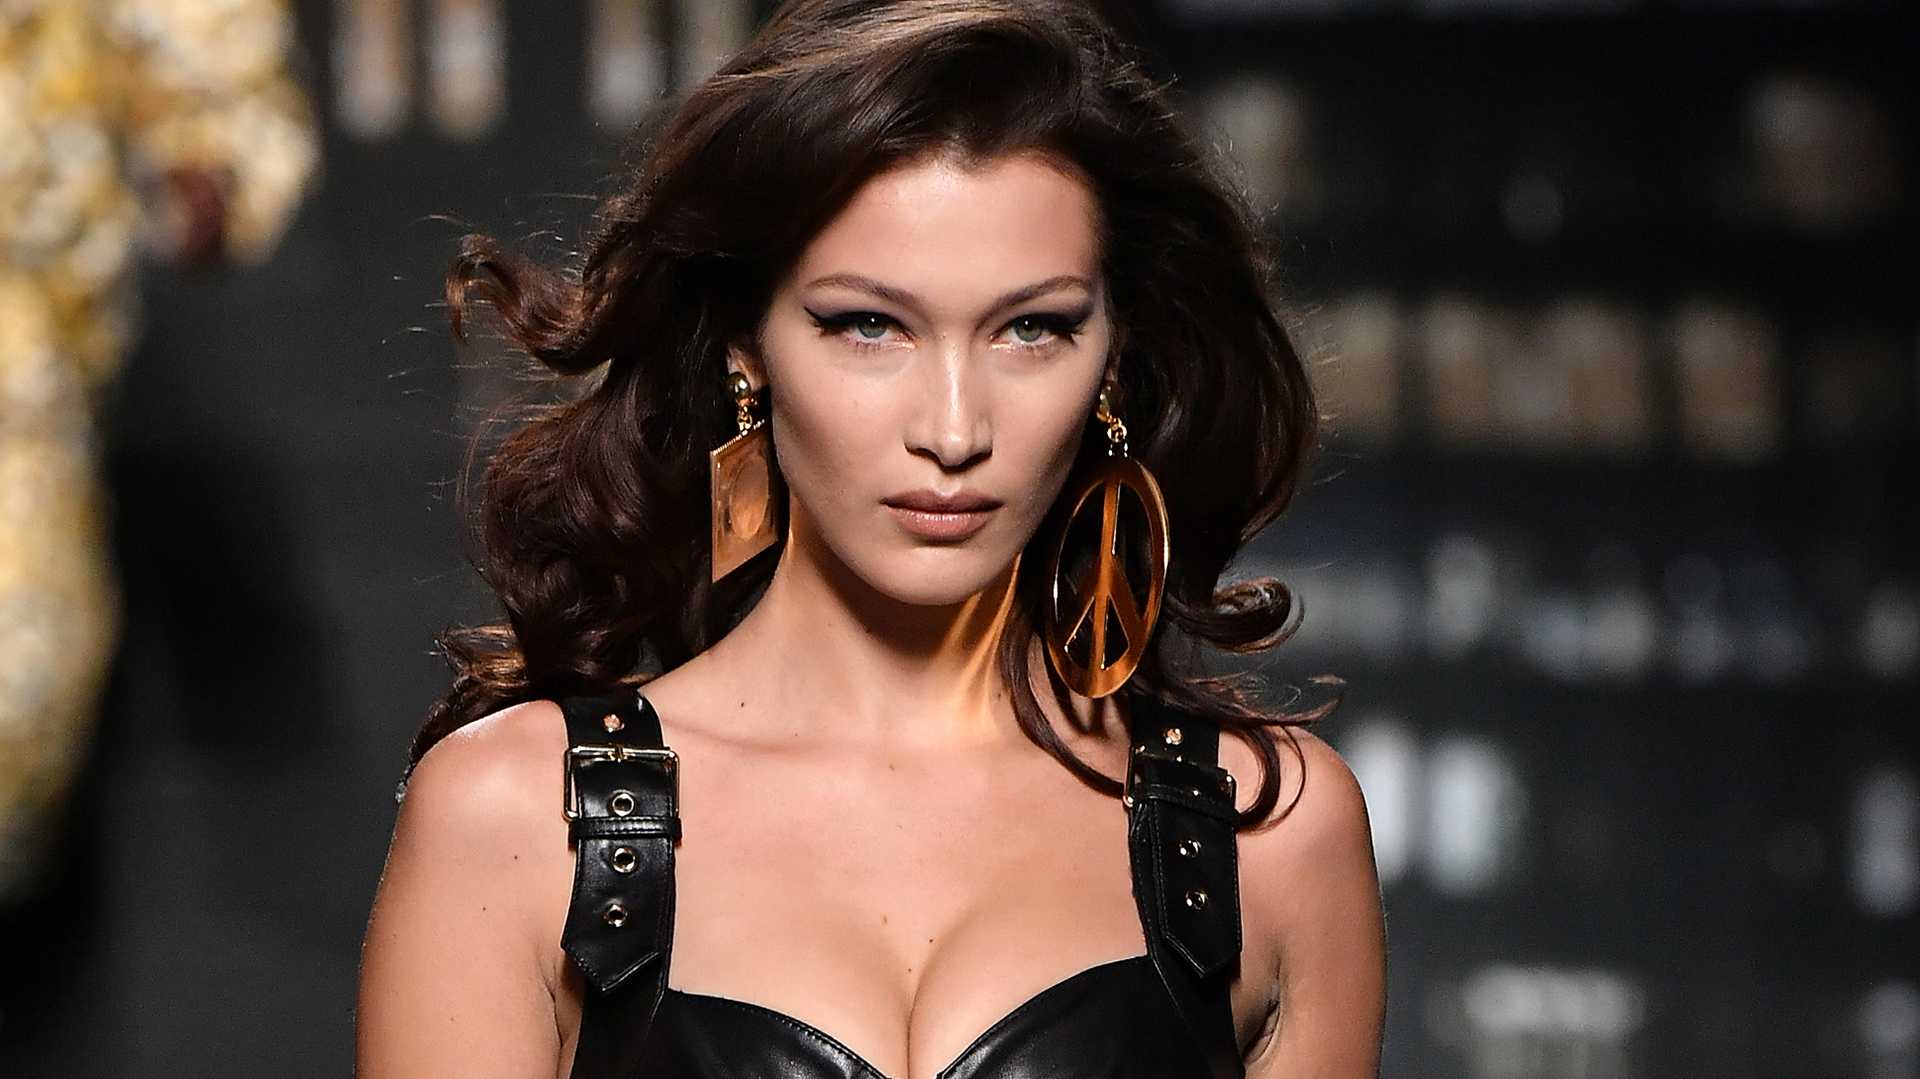 70+ Hot Pictures Of Bella Hadid Prove That Is A Majestic Beauty 4